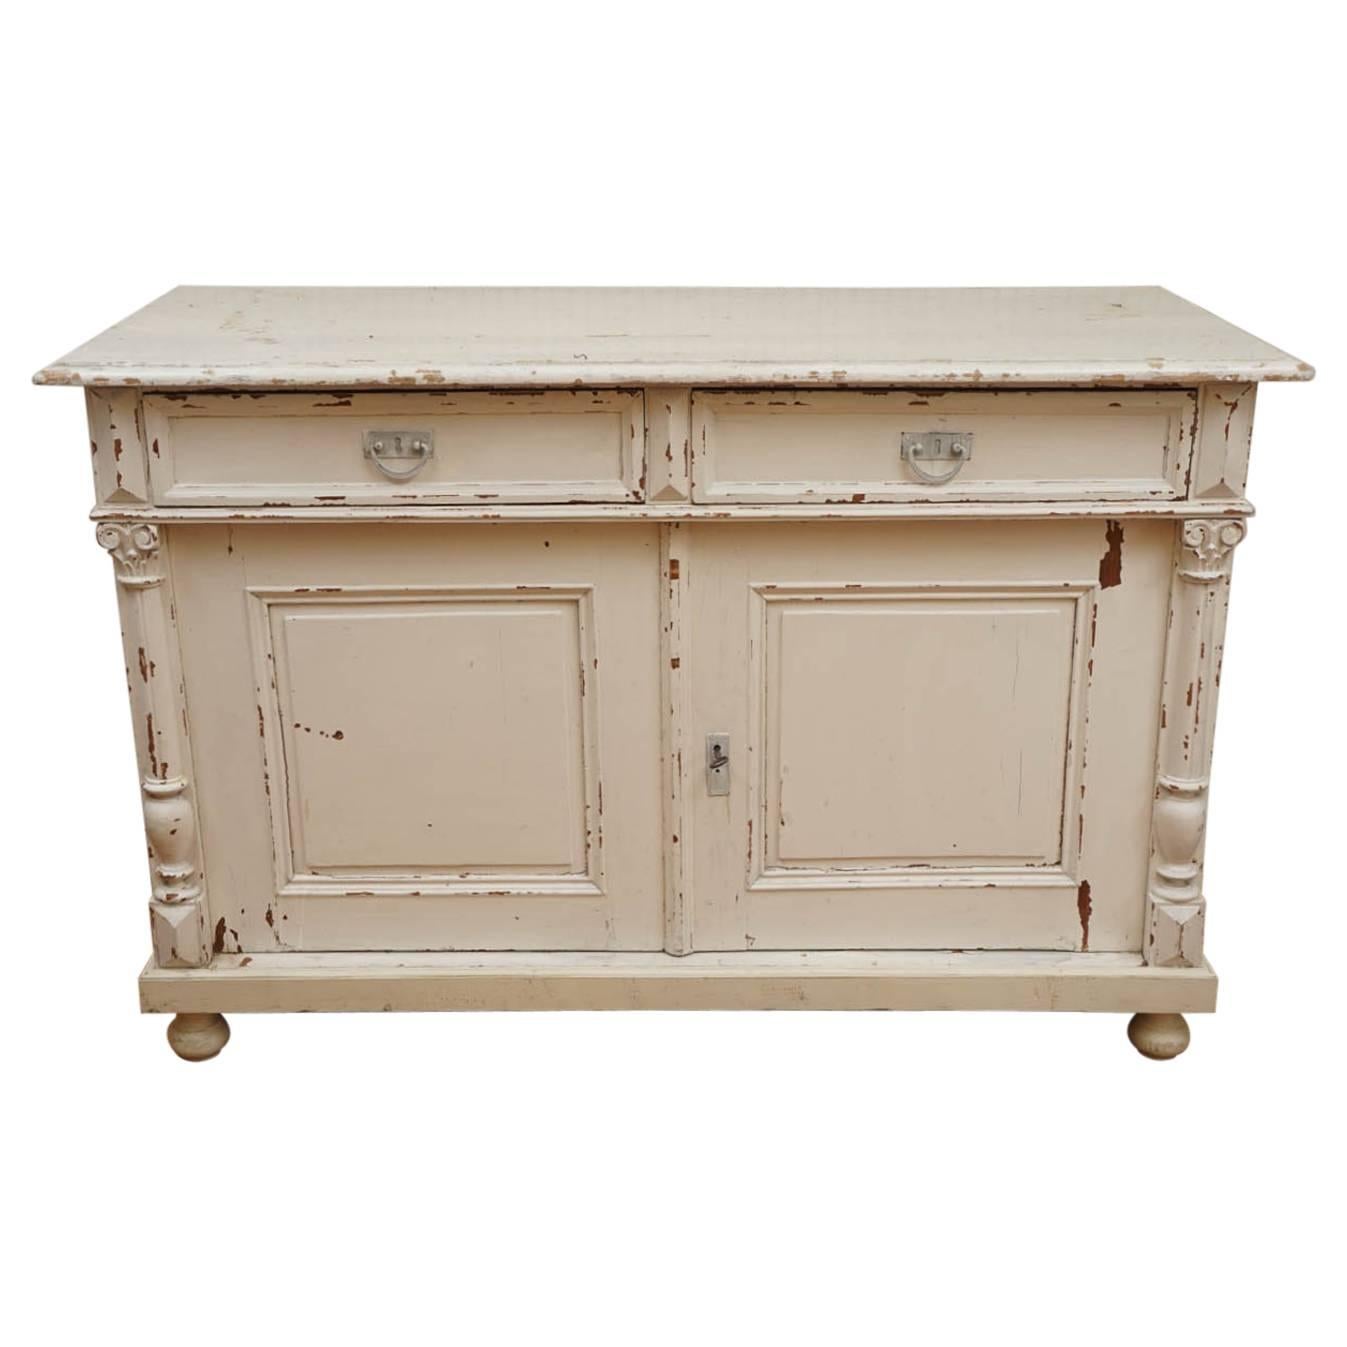 Two-Door, Two-Drawer Painted Buffet